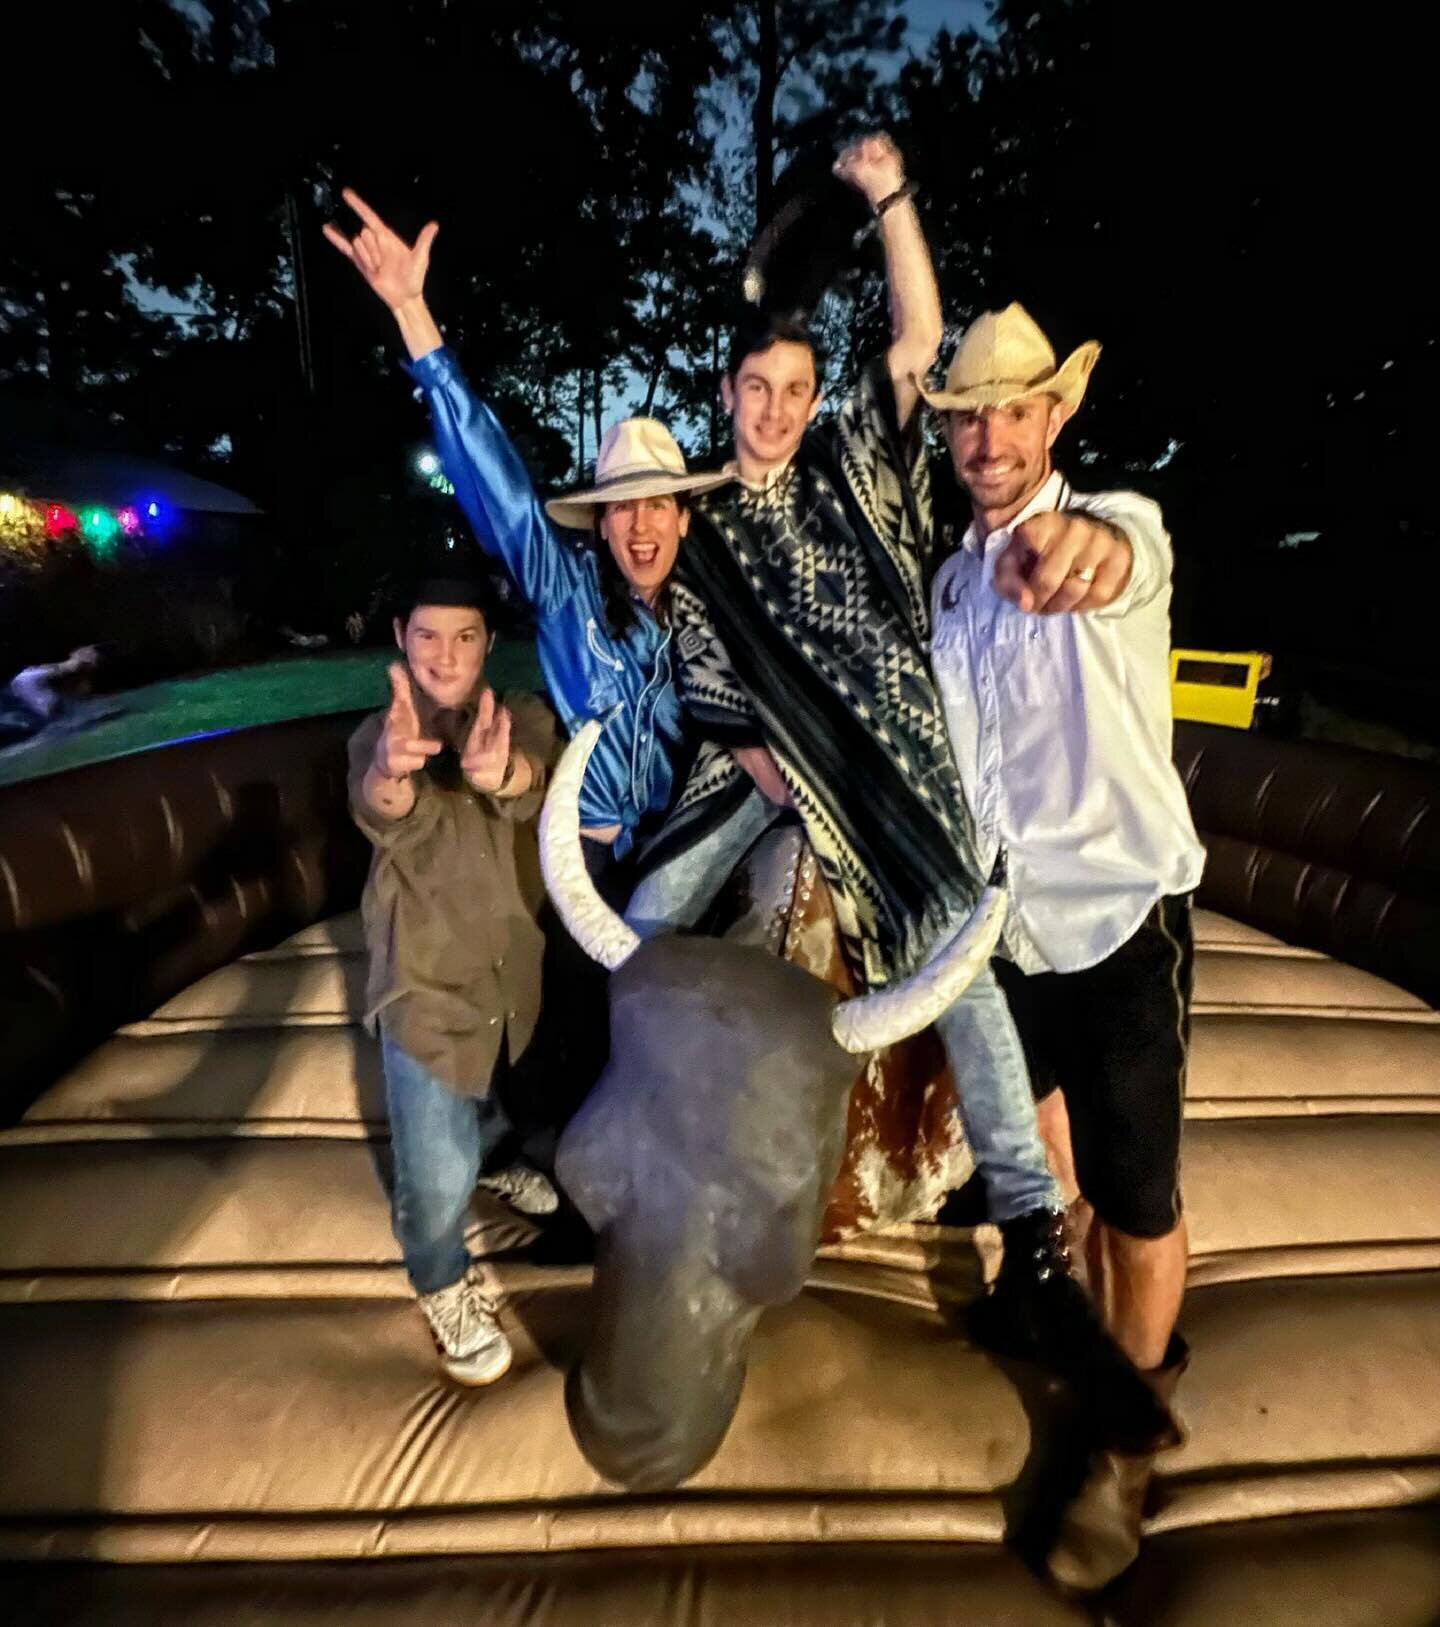 We don&rsquo;t always cowboy, but when we do, damn straight the mechanical bull is always welcome!🤘🏼 #giddyup #8seconds #nostalgicallygrateful